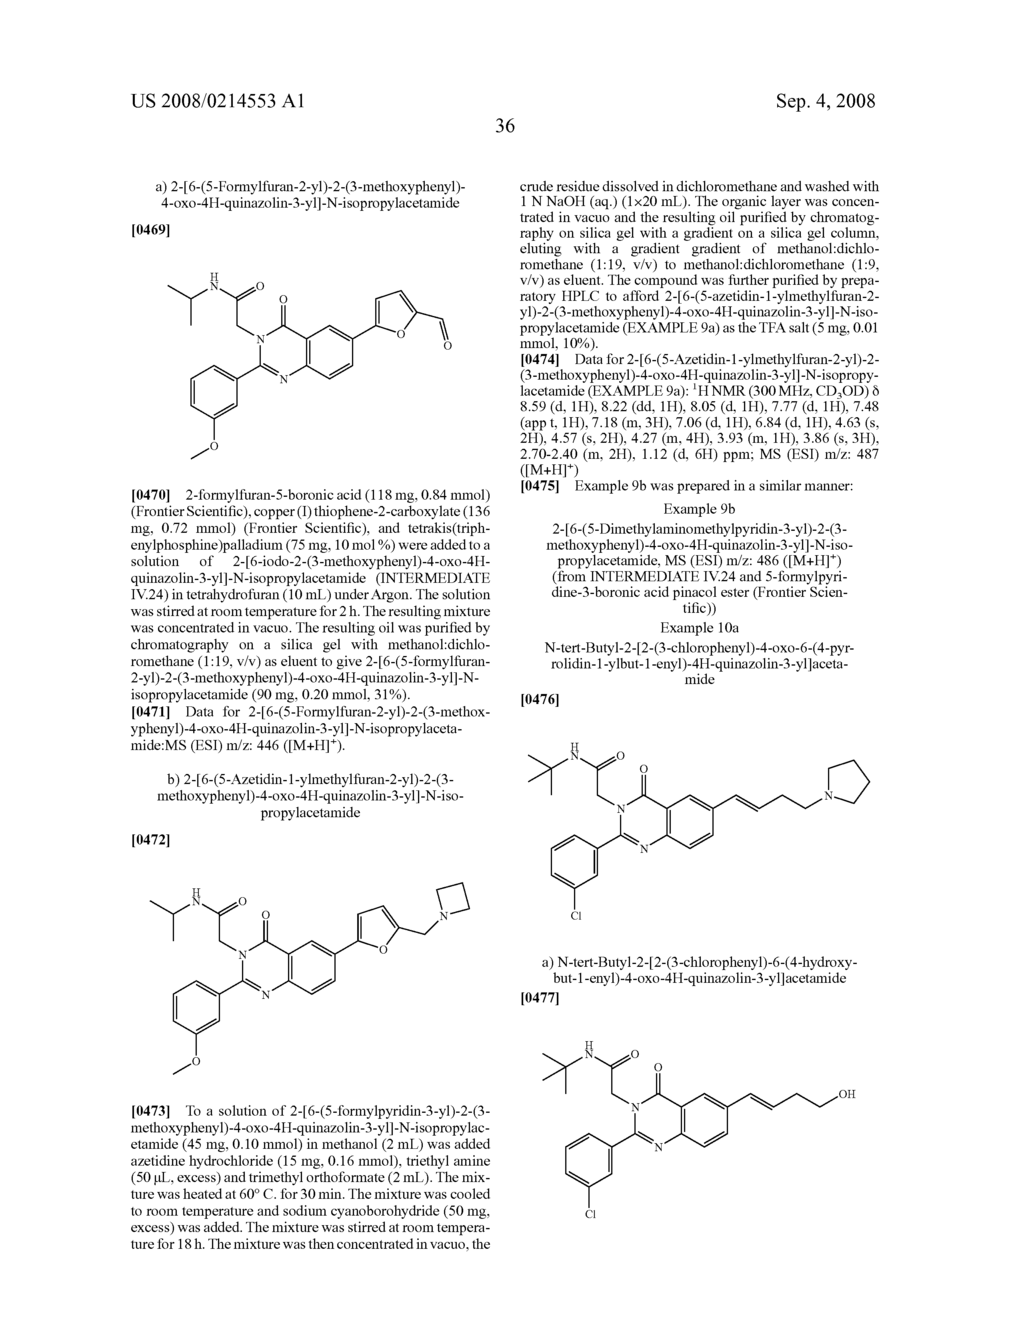 2-(4-Oxo-4H-Quinazolin-3-Yl) Acetamides and Their Use as Vasopressin V3 Antagonists - diagram, schematic, and image 37